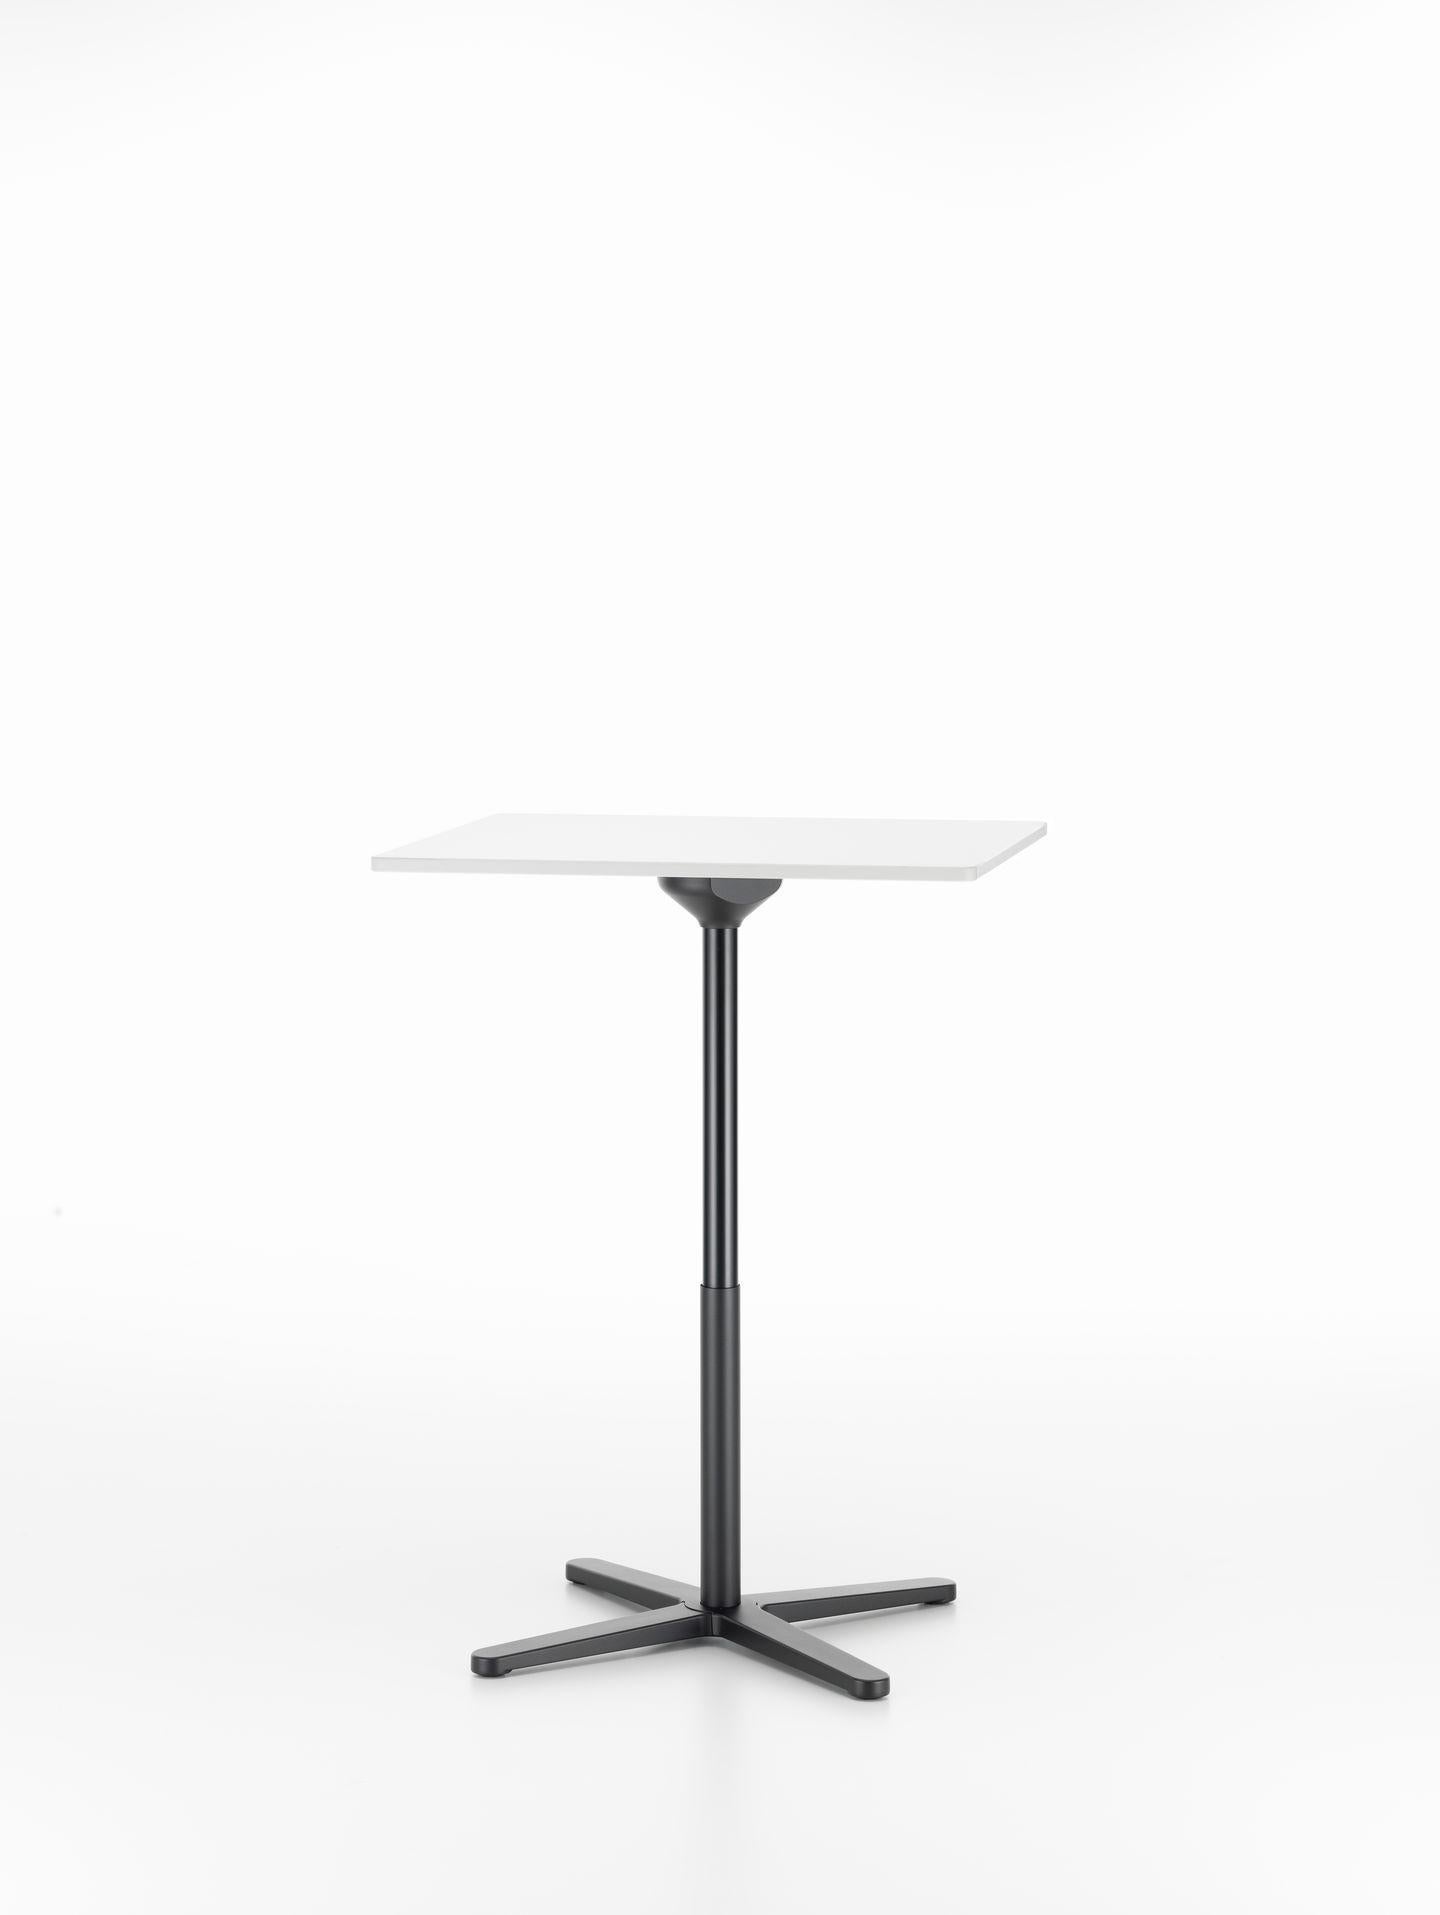 Fold table designed by Jasper Morrison in 2015.
Manufactured by Vitra, Switzerland.

Thanks to a sophisticated mechanism, the Super Fold Table by Jasper Morrison folds up completely with a single movement of the hand. The legs of the four-star